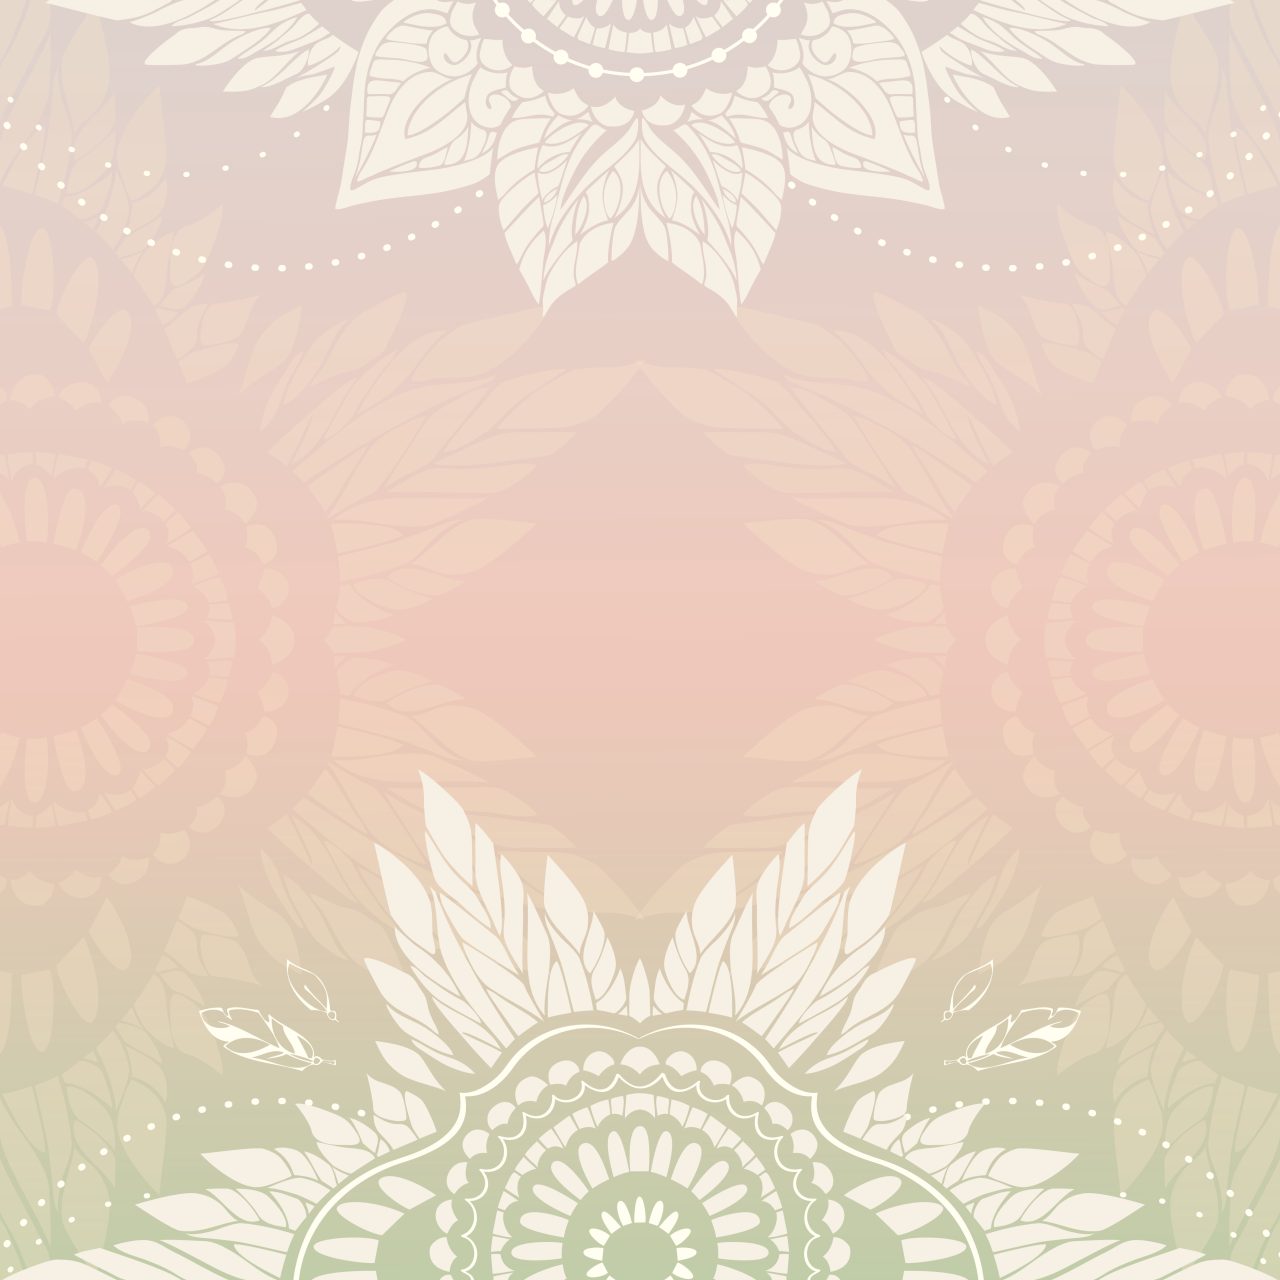 Etnic pattern in pale colors